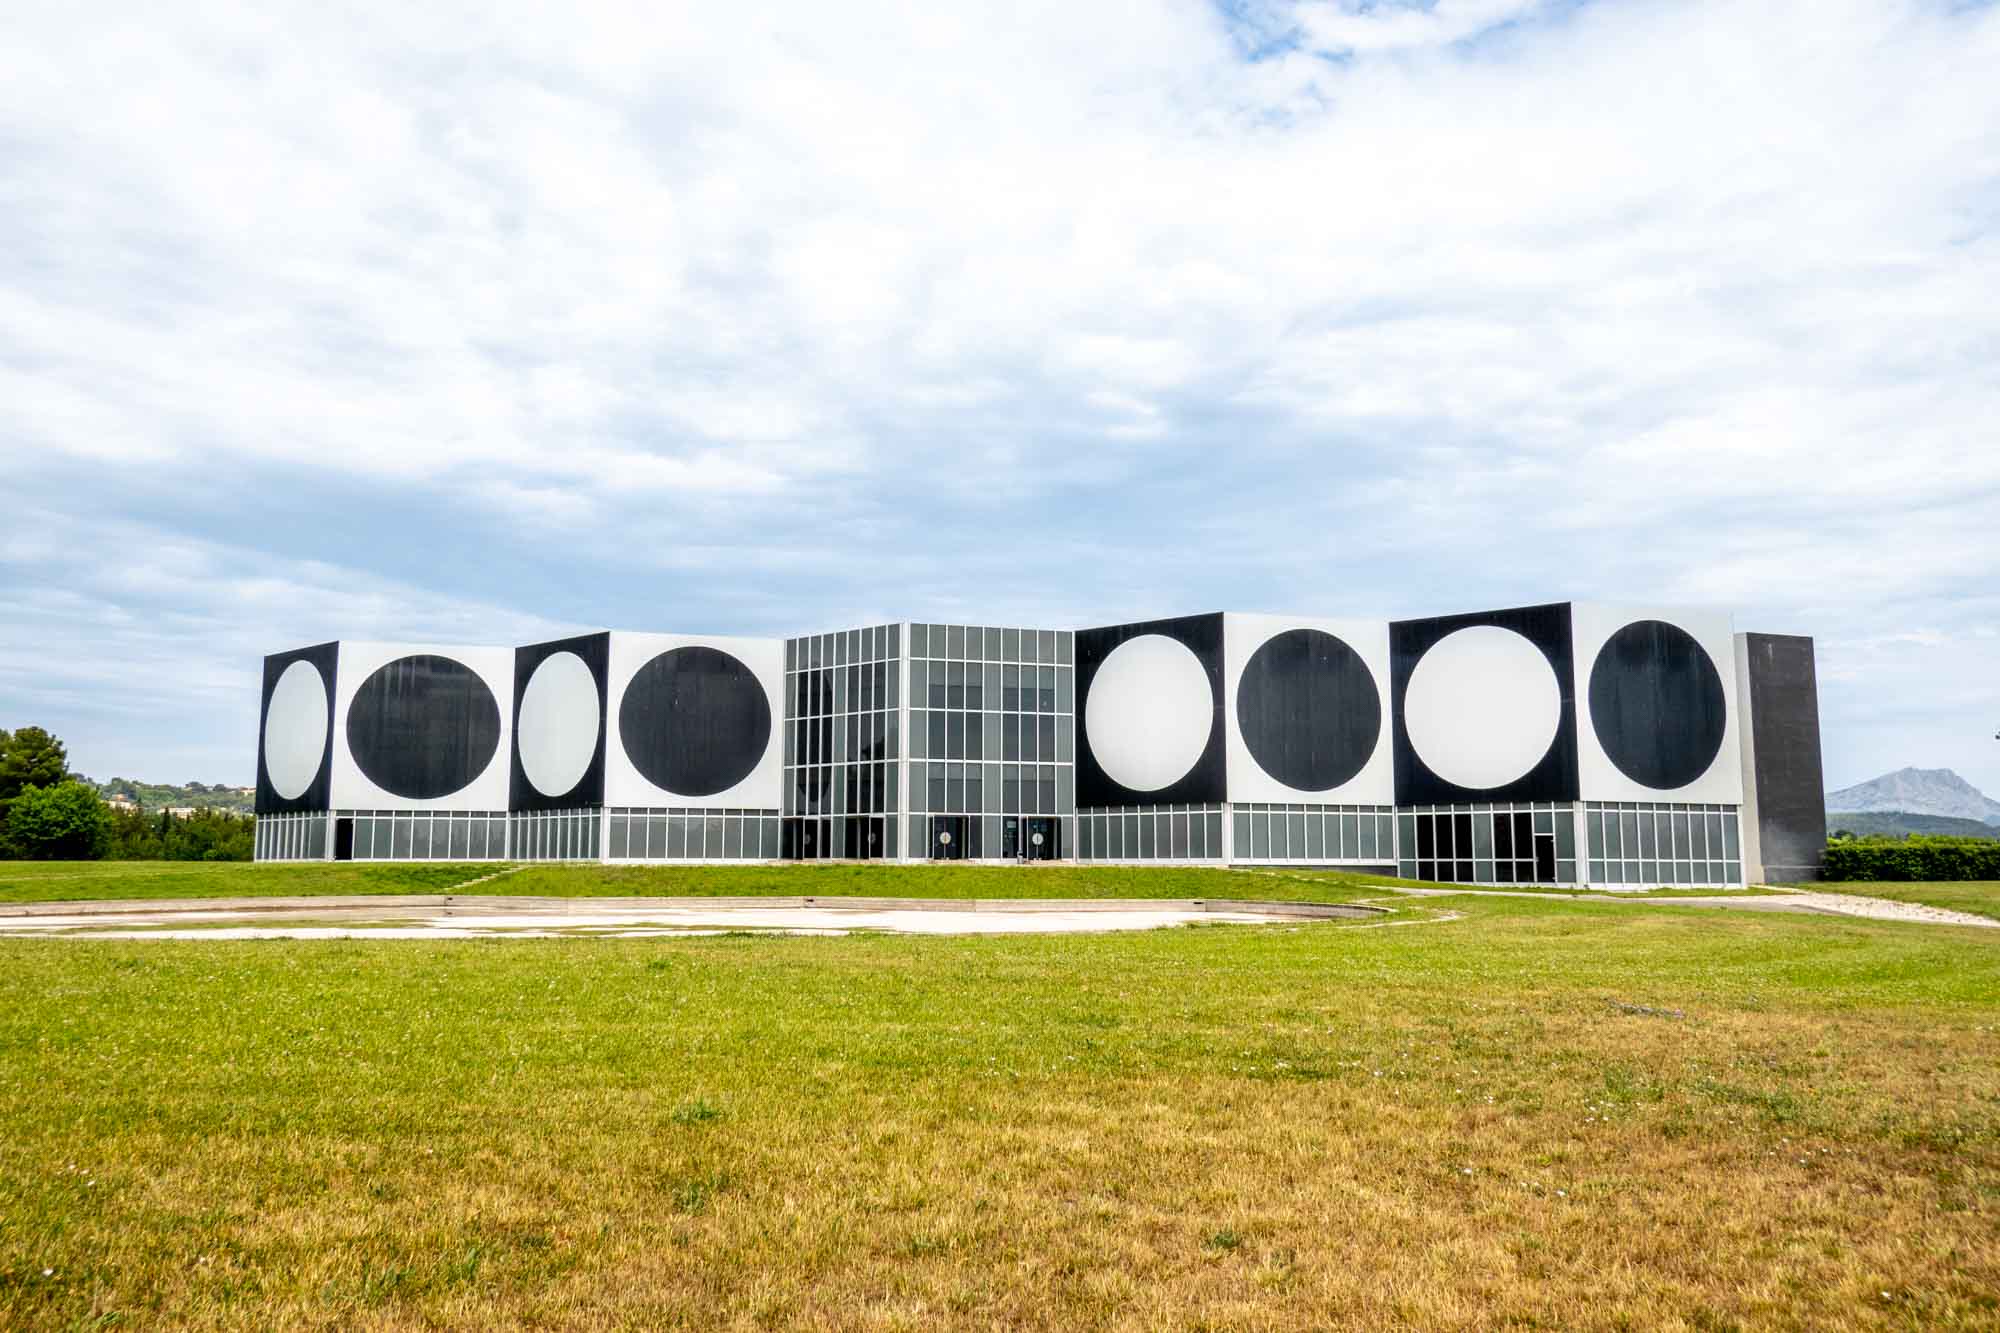 Exterior of a building with a graphic design of black and white circles and squares.